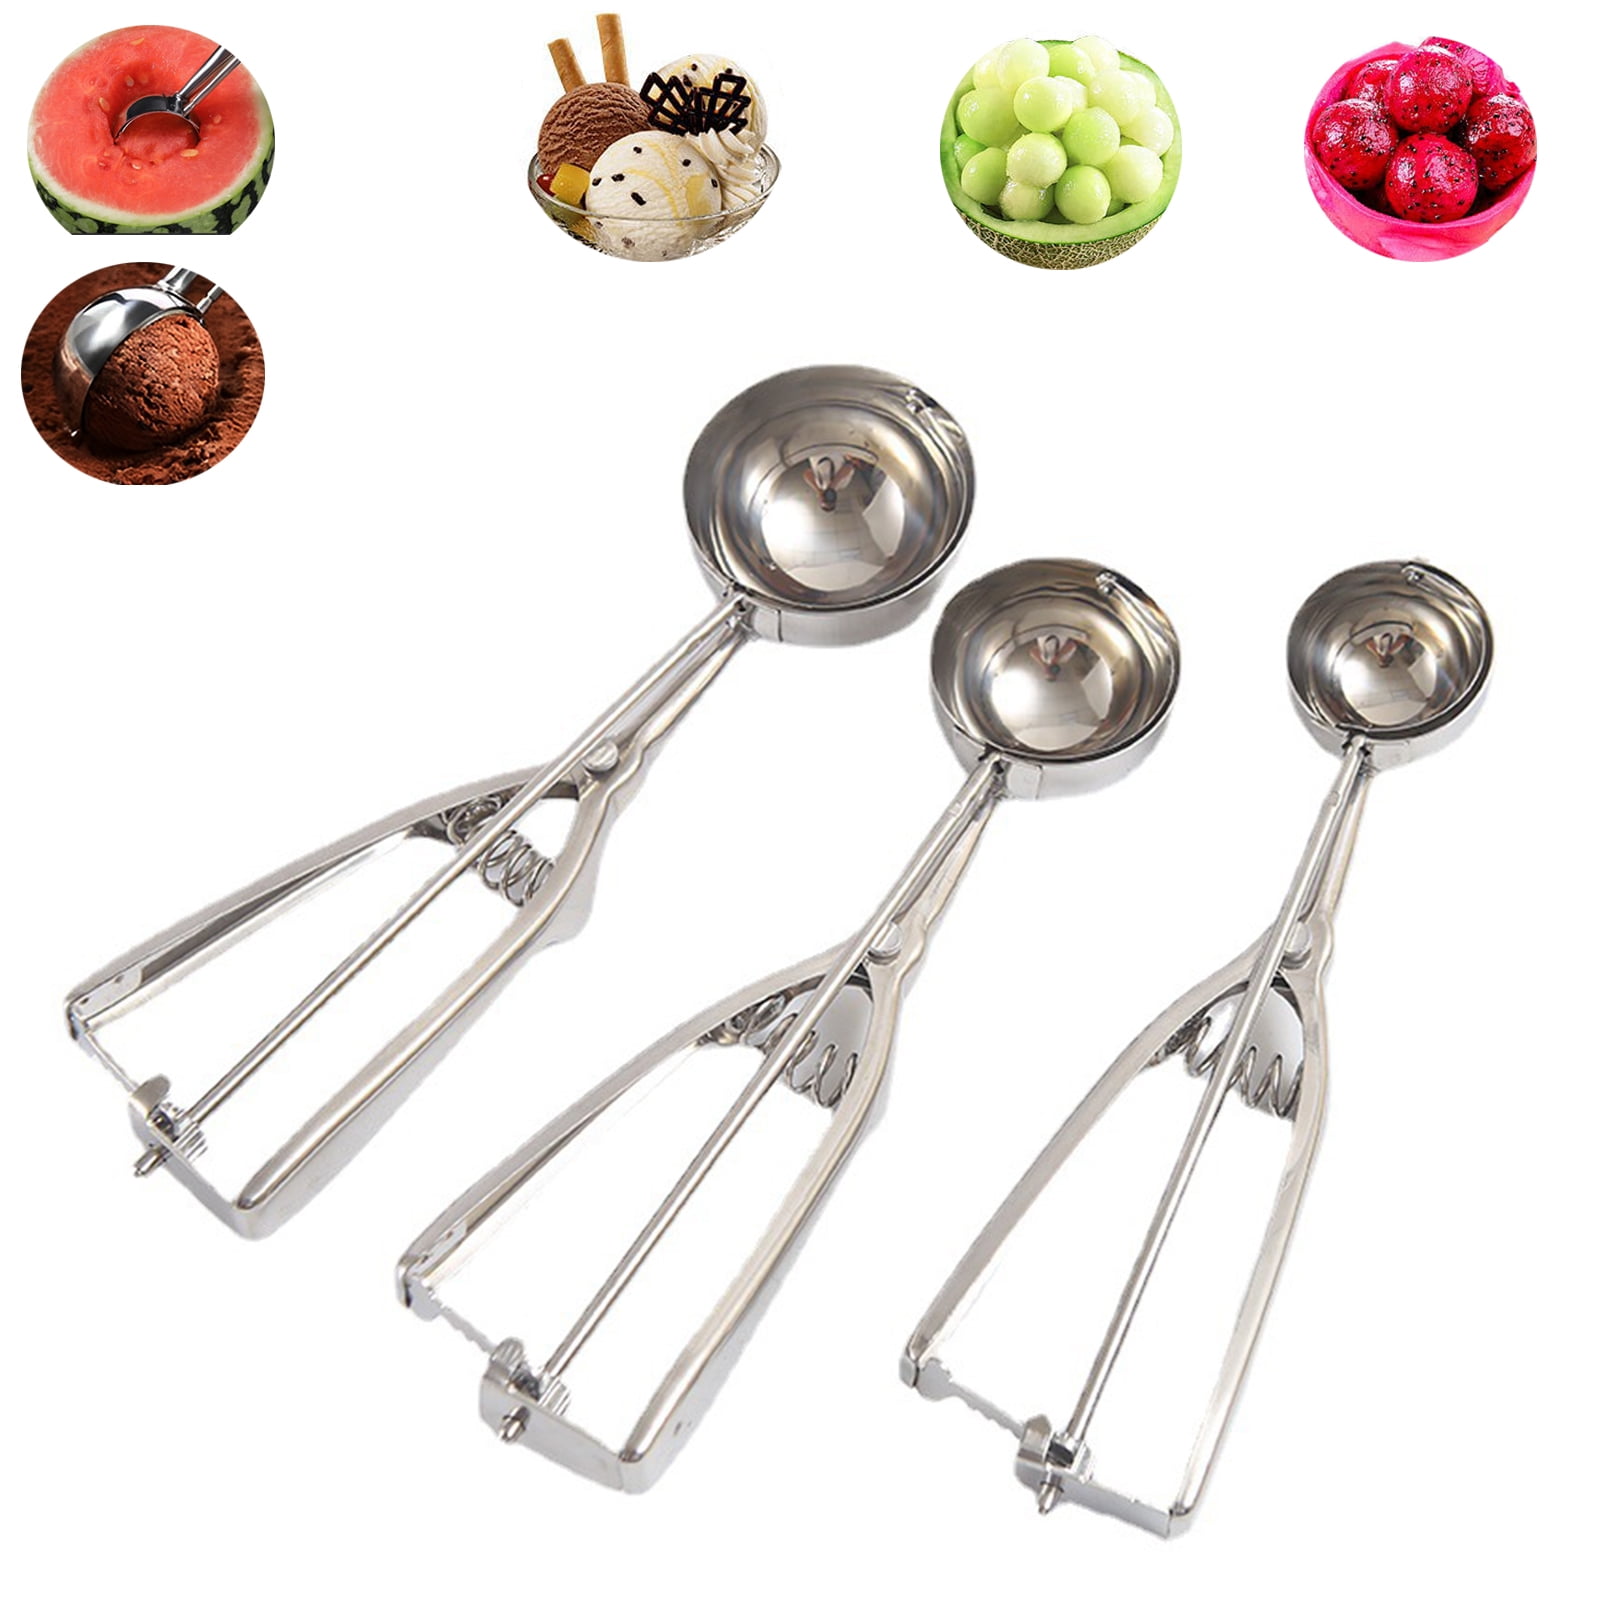 Stainless Steel , Polished, 3 Pieces Different Sizes Small 4cm, Medium 5cm  Large 6cm Ice Cream Spoon With Ejector, R